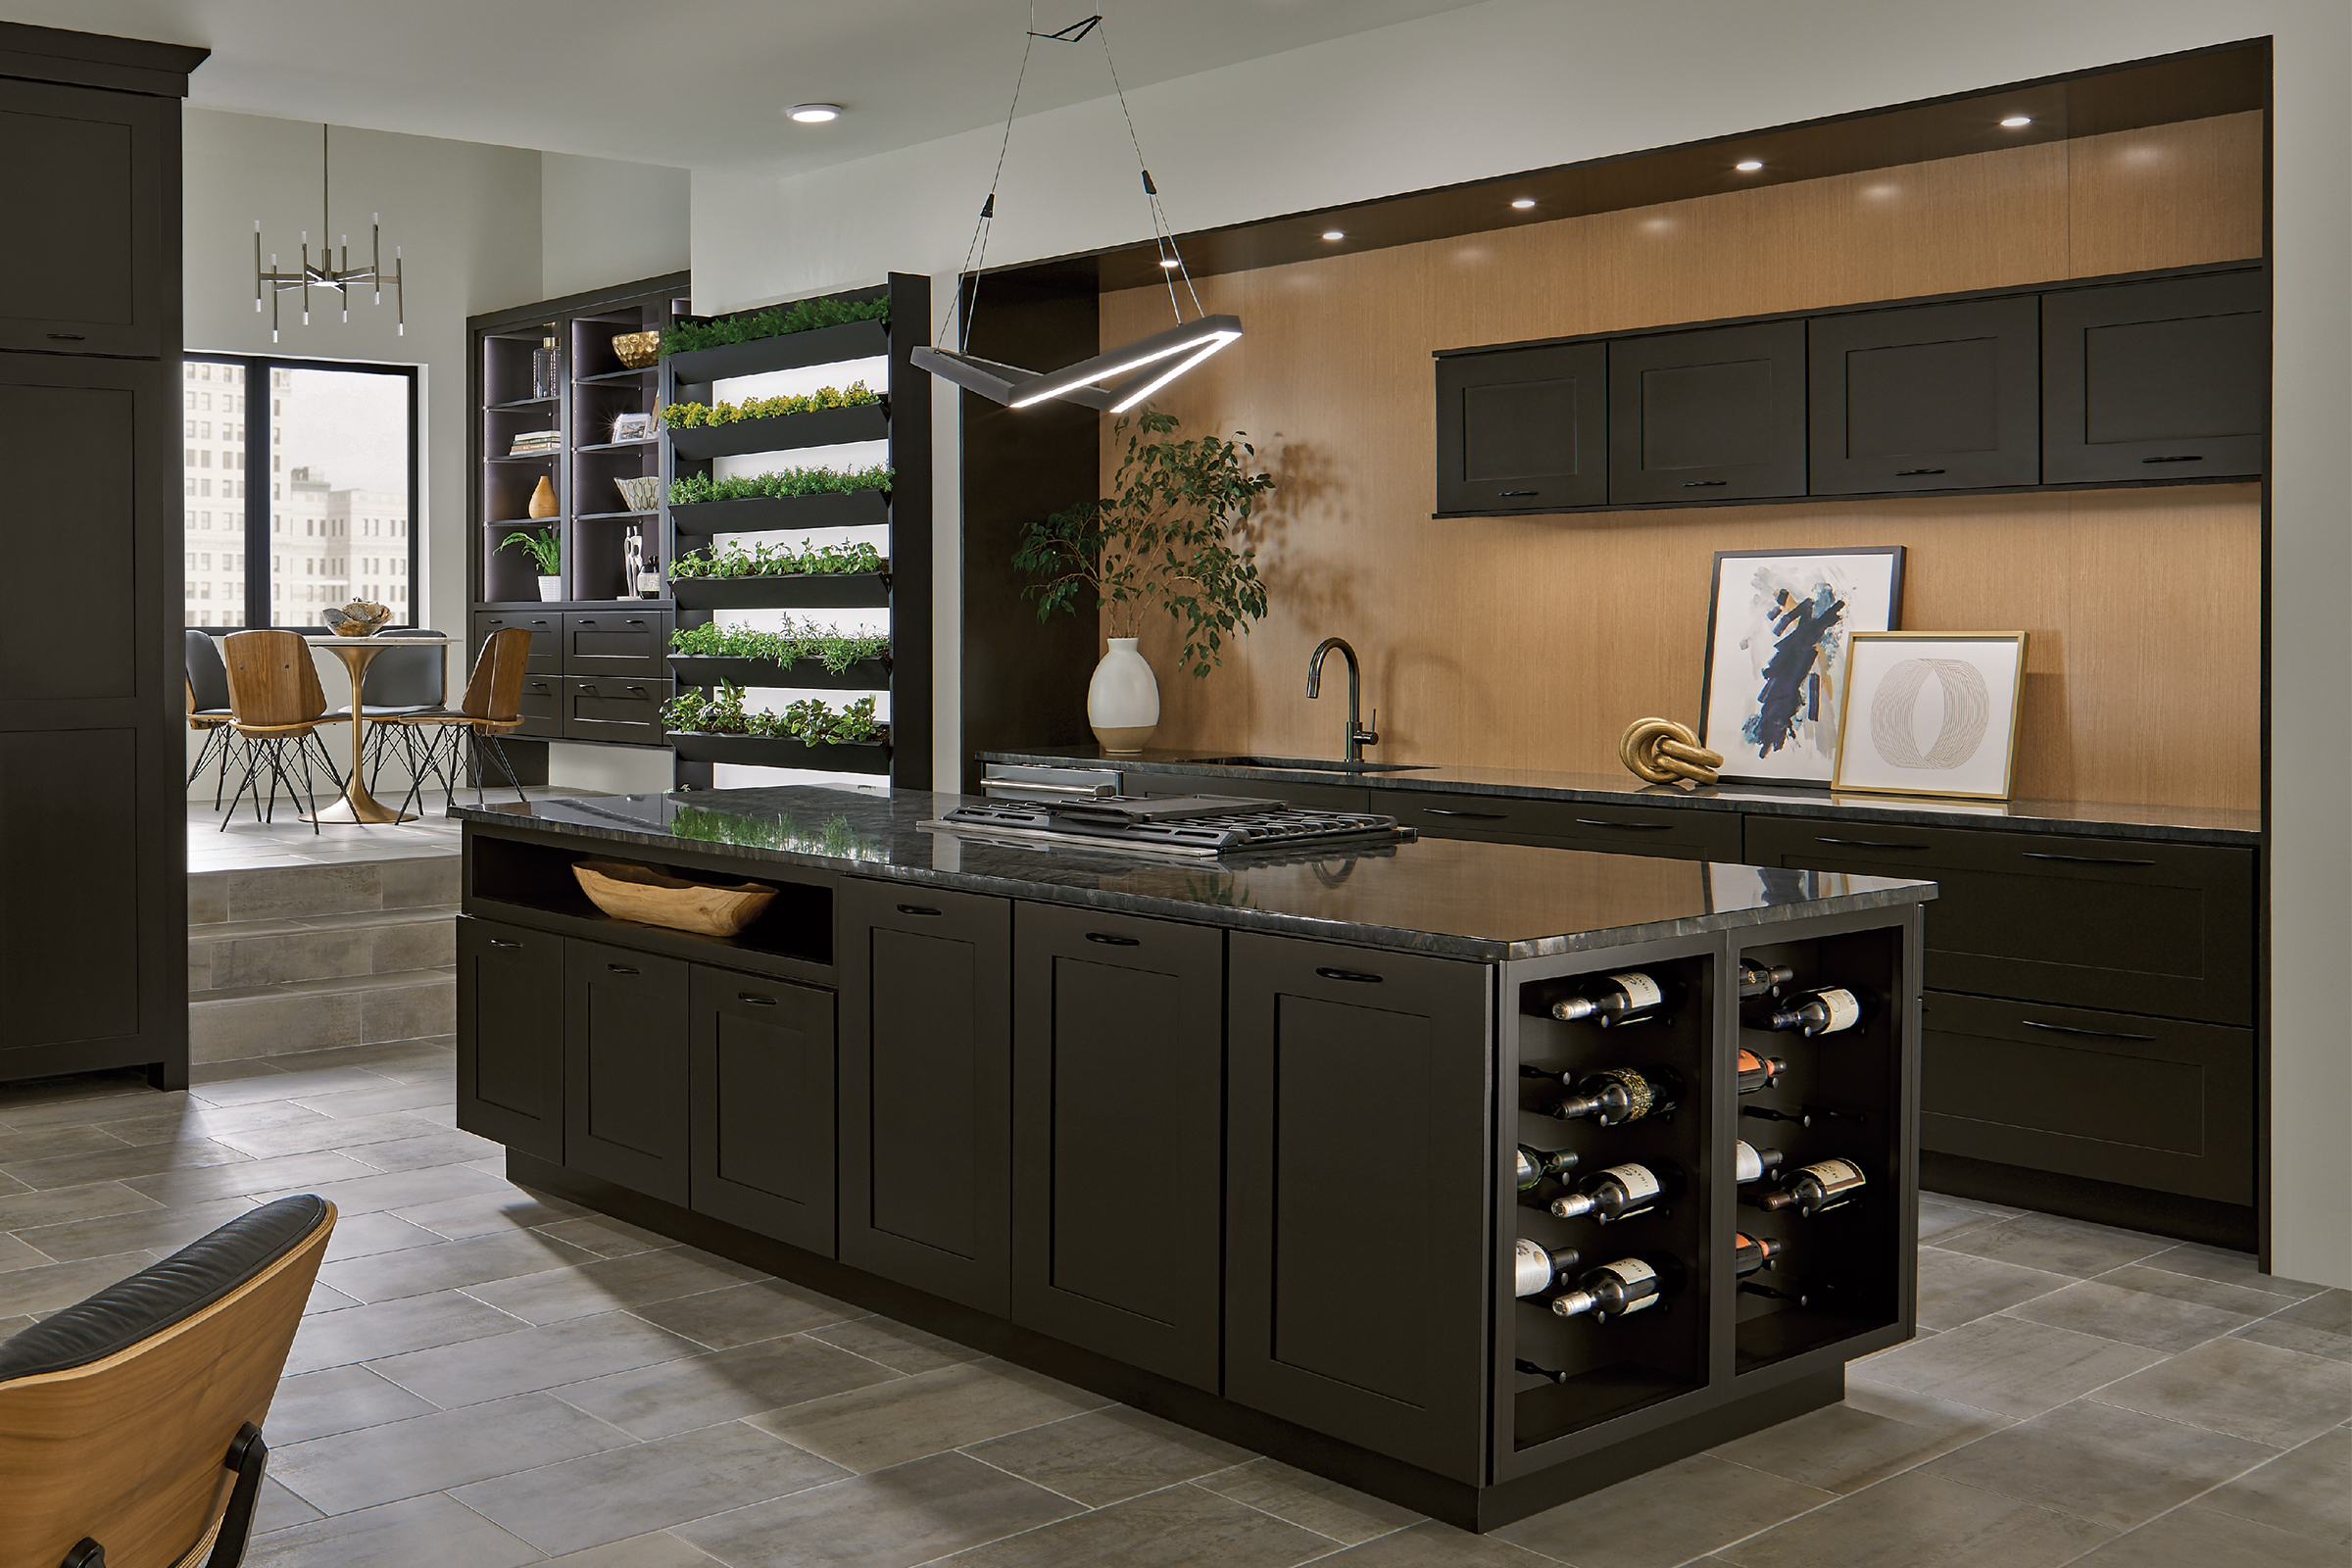 Riverbed charcoal grey on KraftMaid kitchen cabinets.